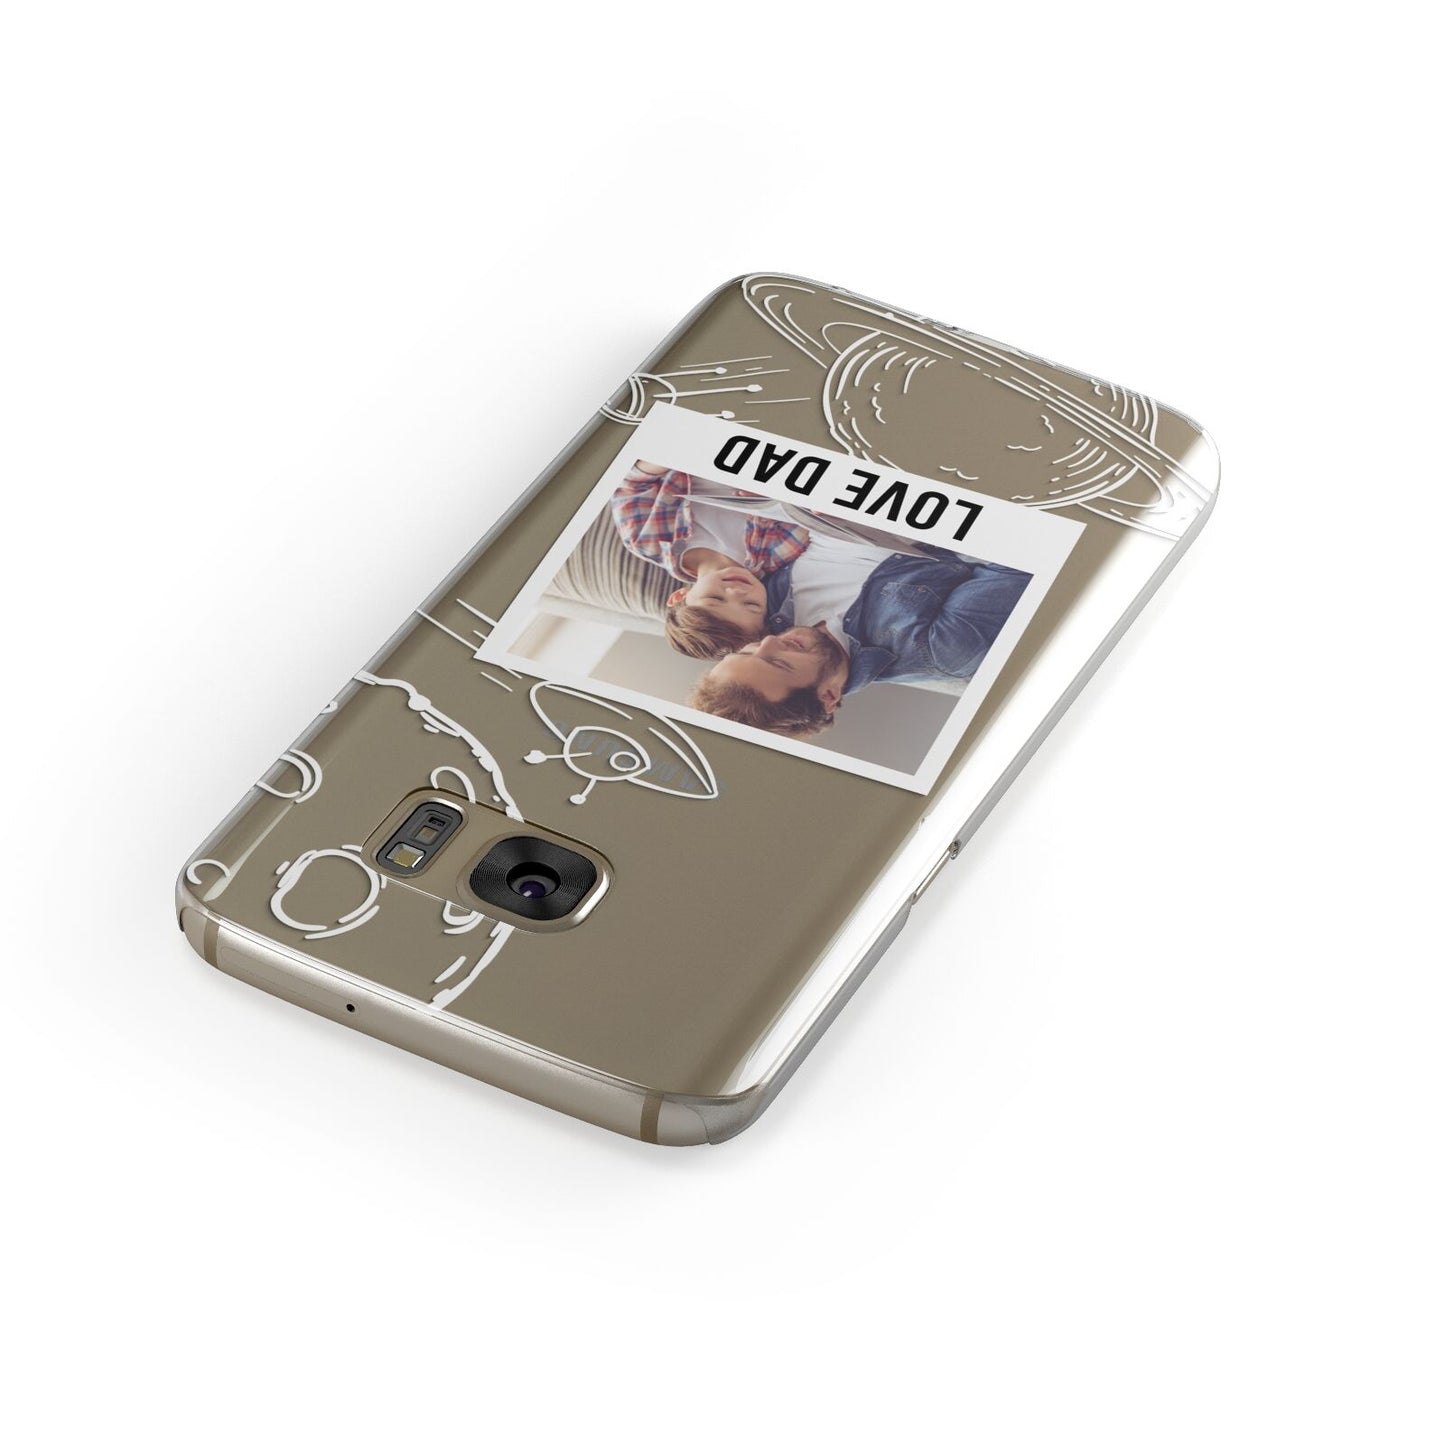 Personalised From Dad Photo Samsung Galaxy Case Front Close Up